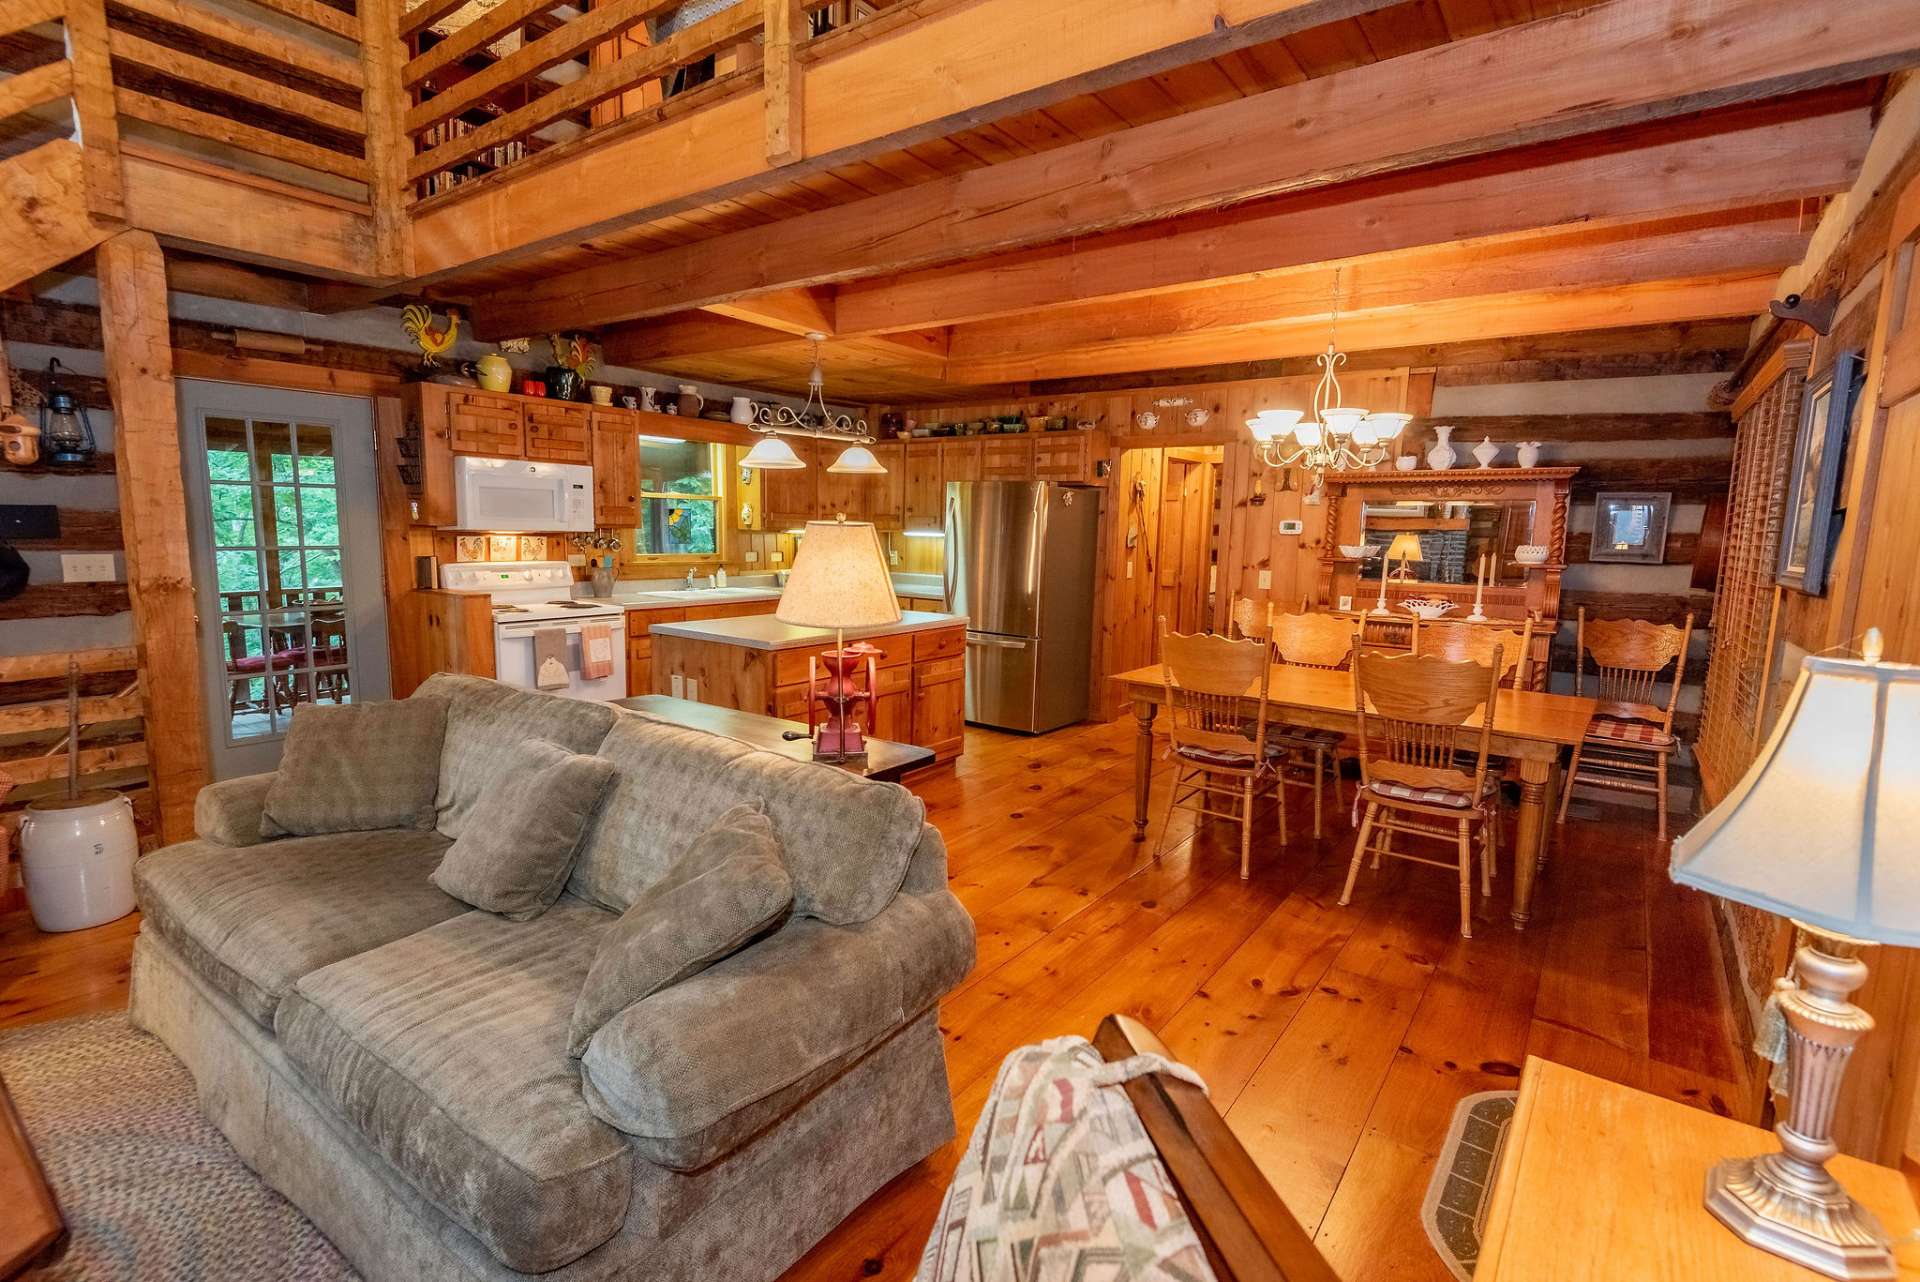 The interior features wide-plank wood flooring throughout the cabin.